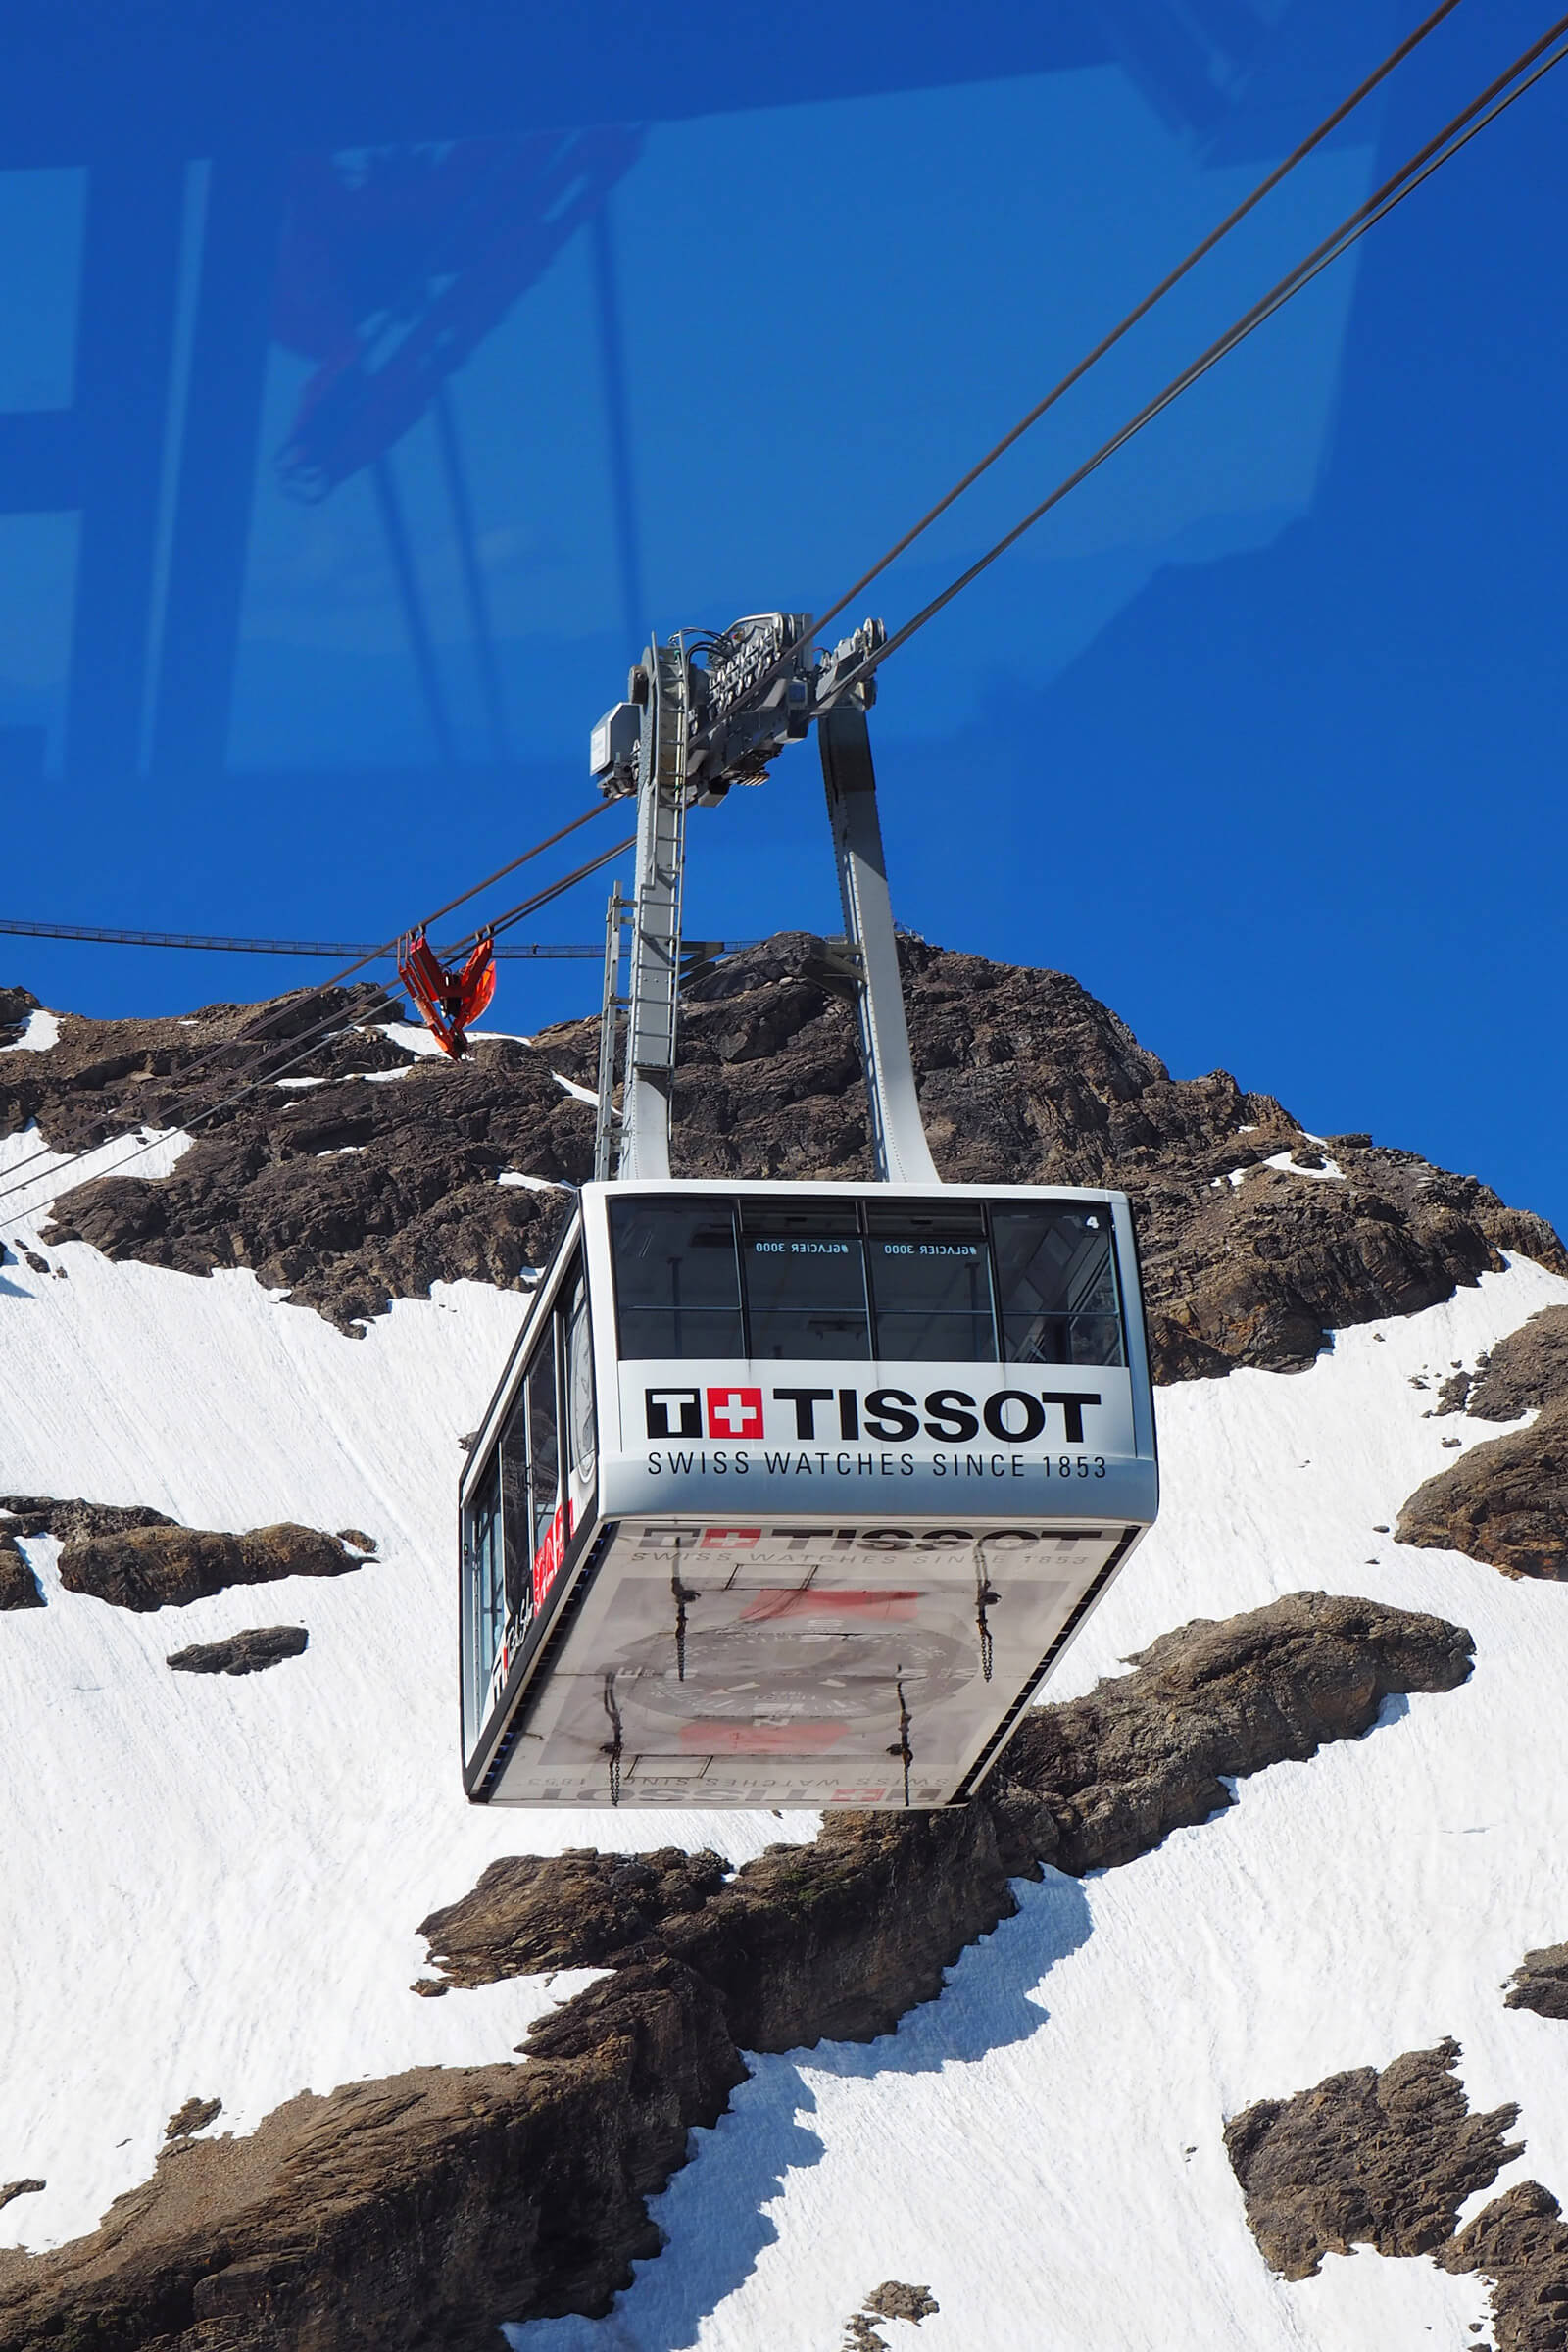 Cable Cars in Switzerland -Glacier 3000 Cable Car